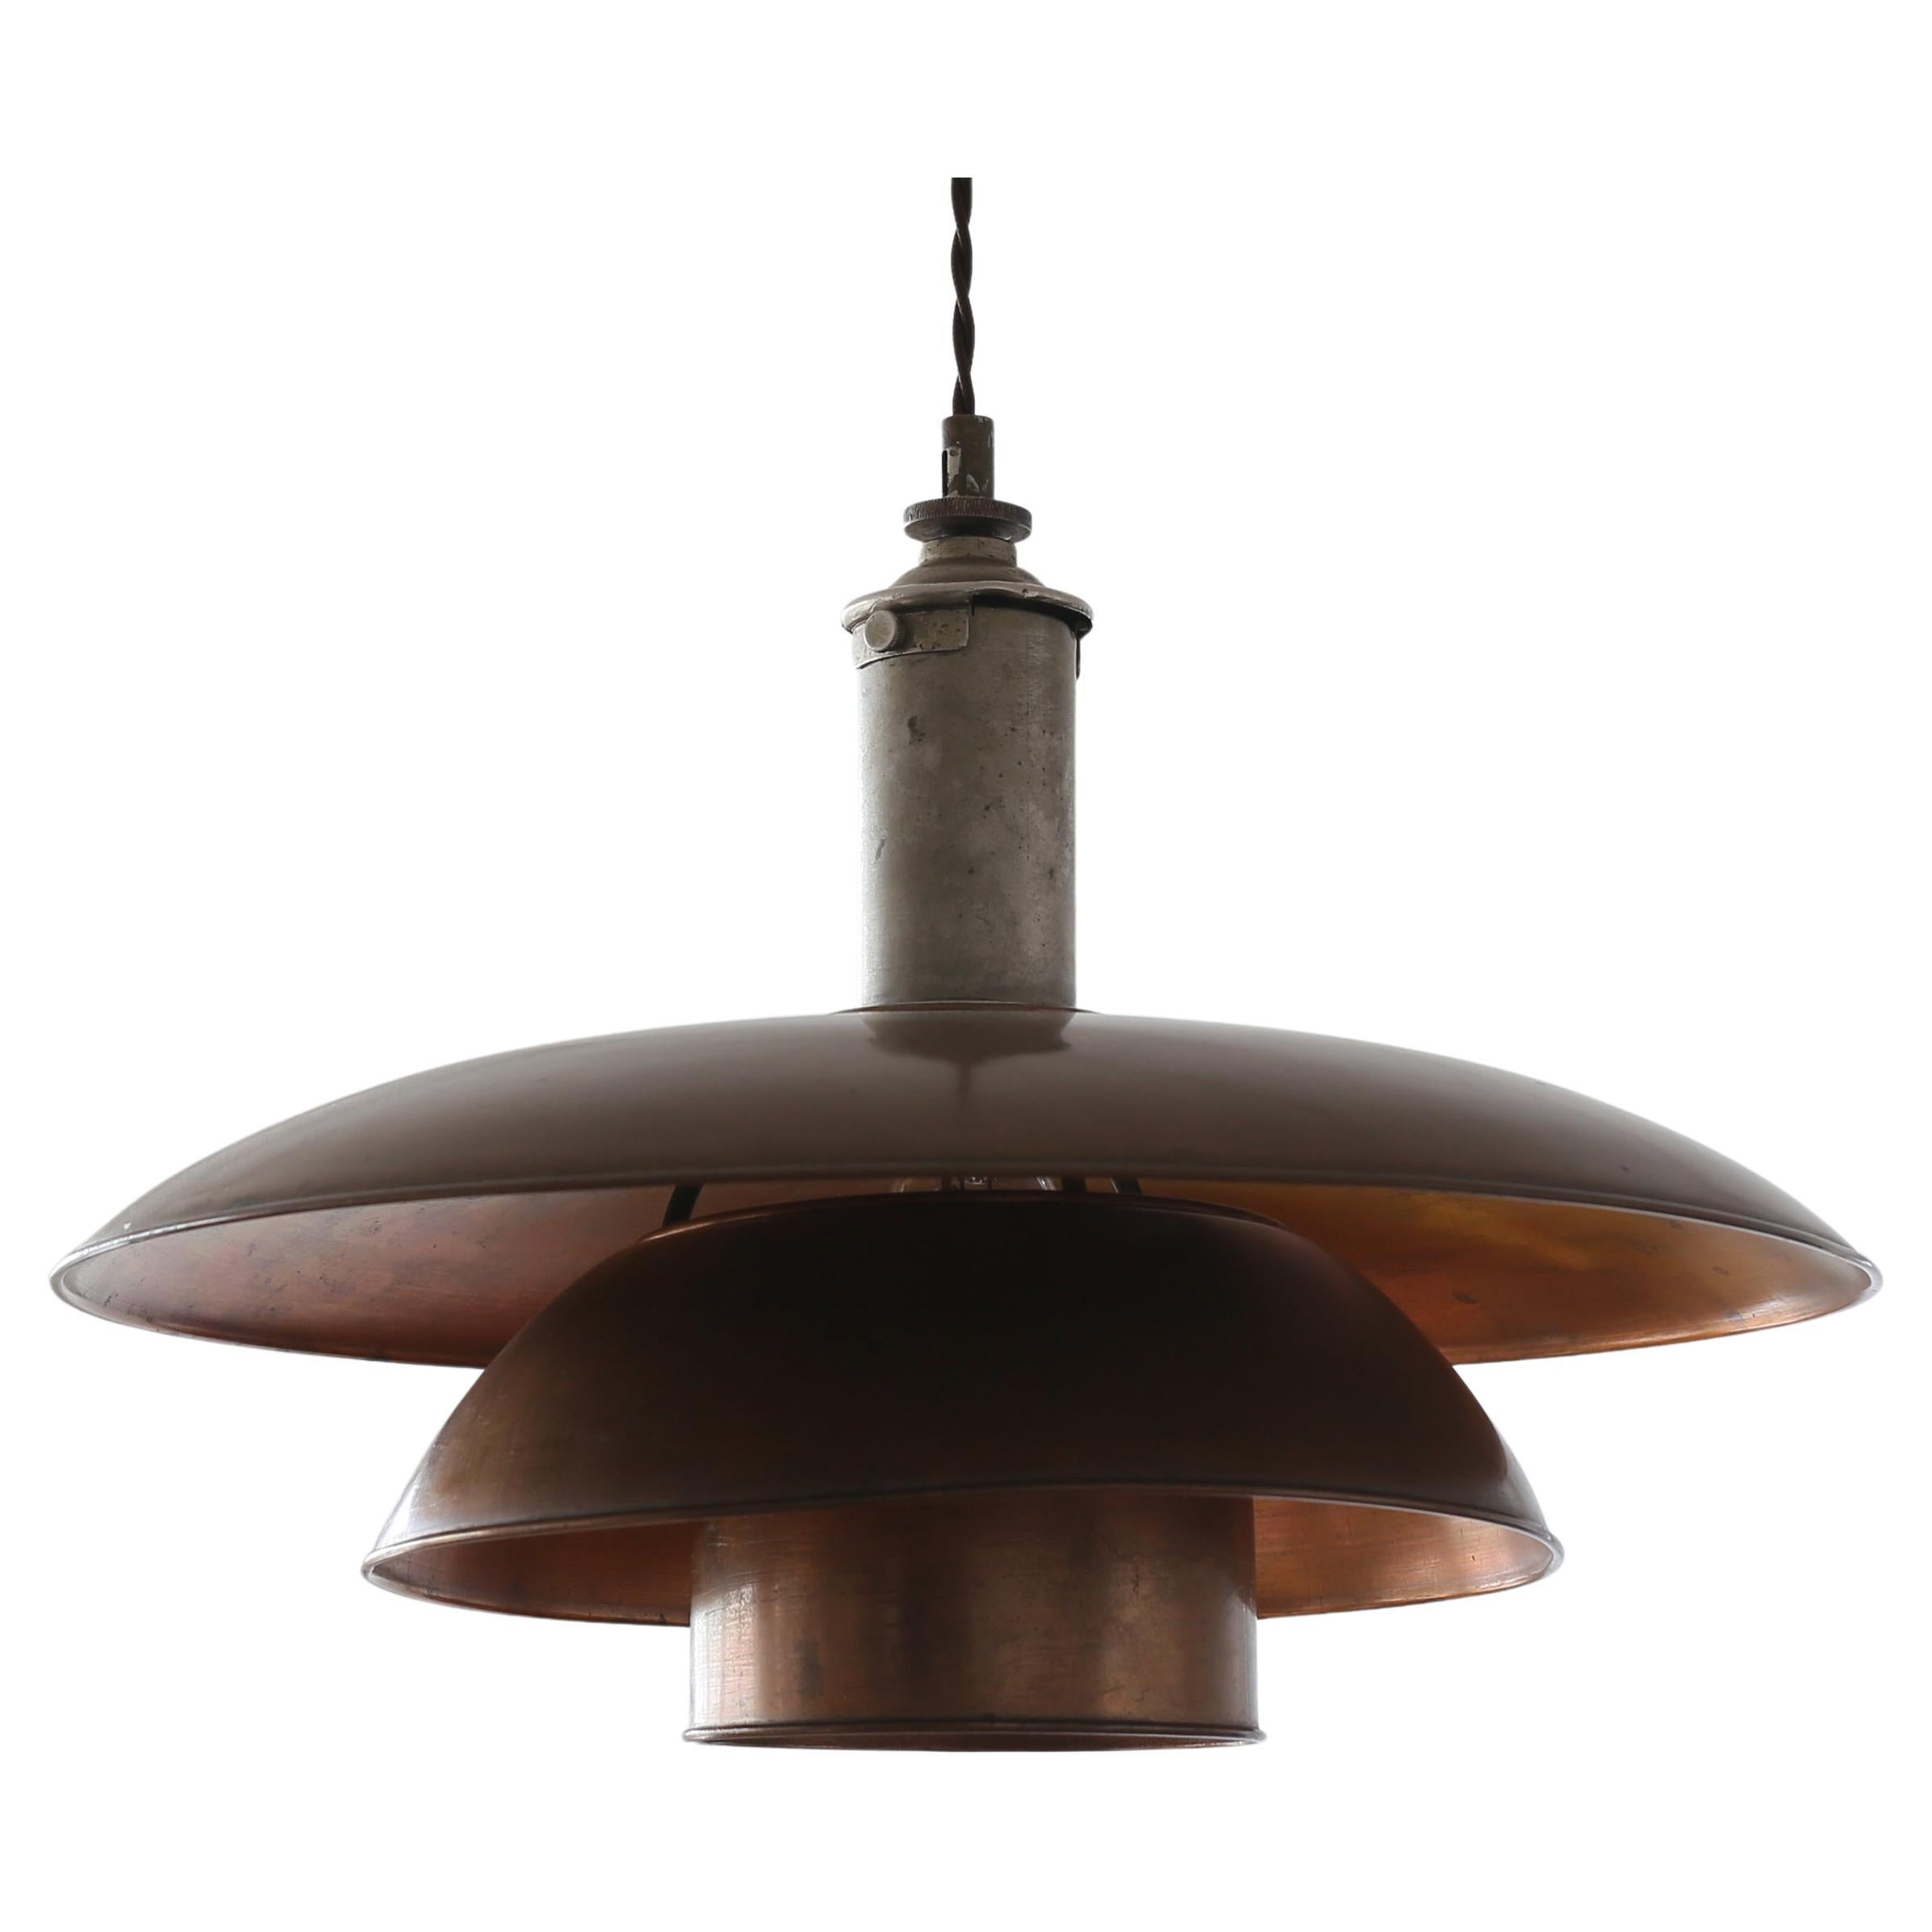 Early Poul Henningsen 4/4 Copper Ceiling Lamp, 1926 For Sale